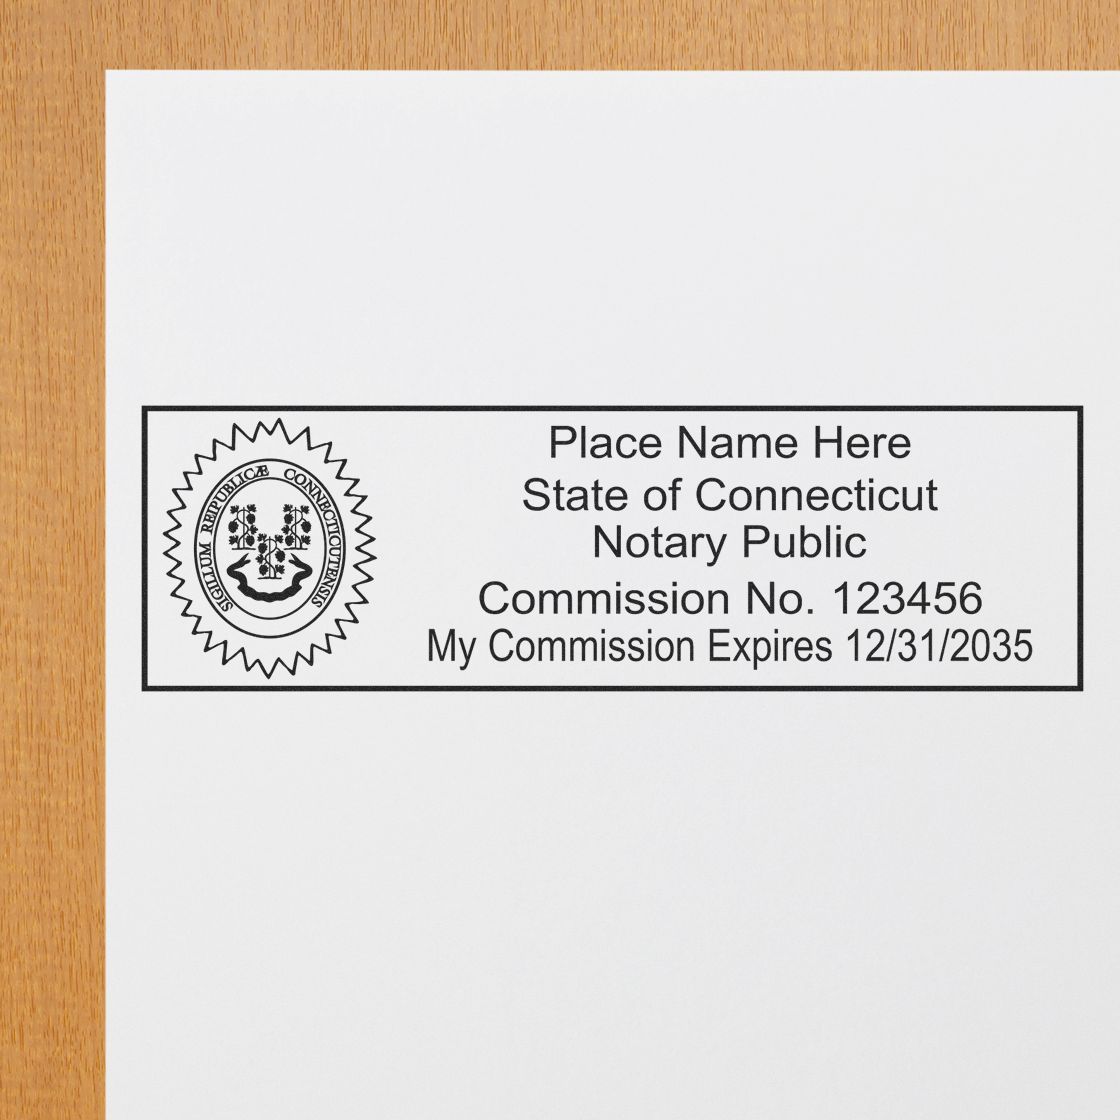 PSI Connecticut Notary Stamp in use photo showing a stamped imprint of the PSI Connecticut Notary Stamp